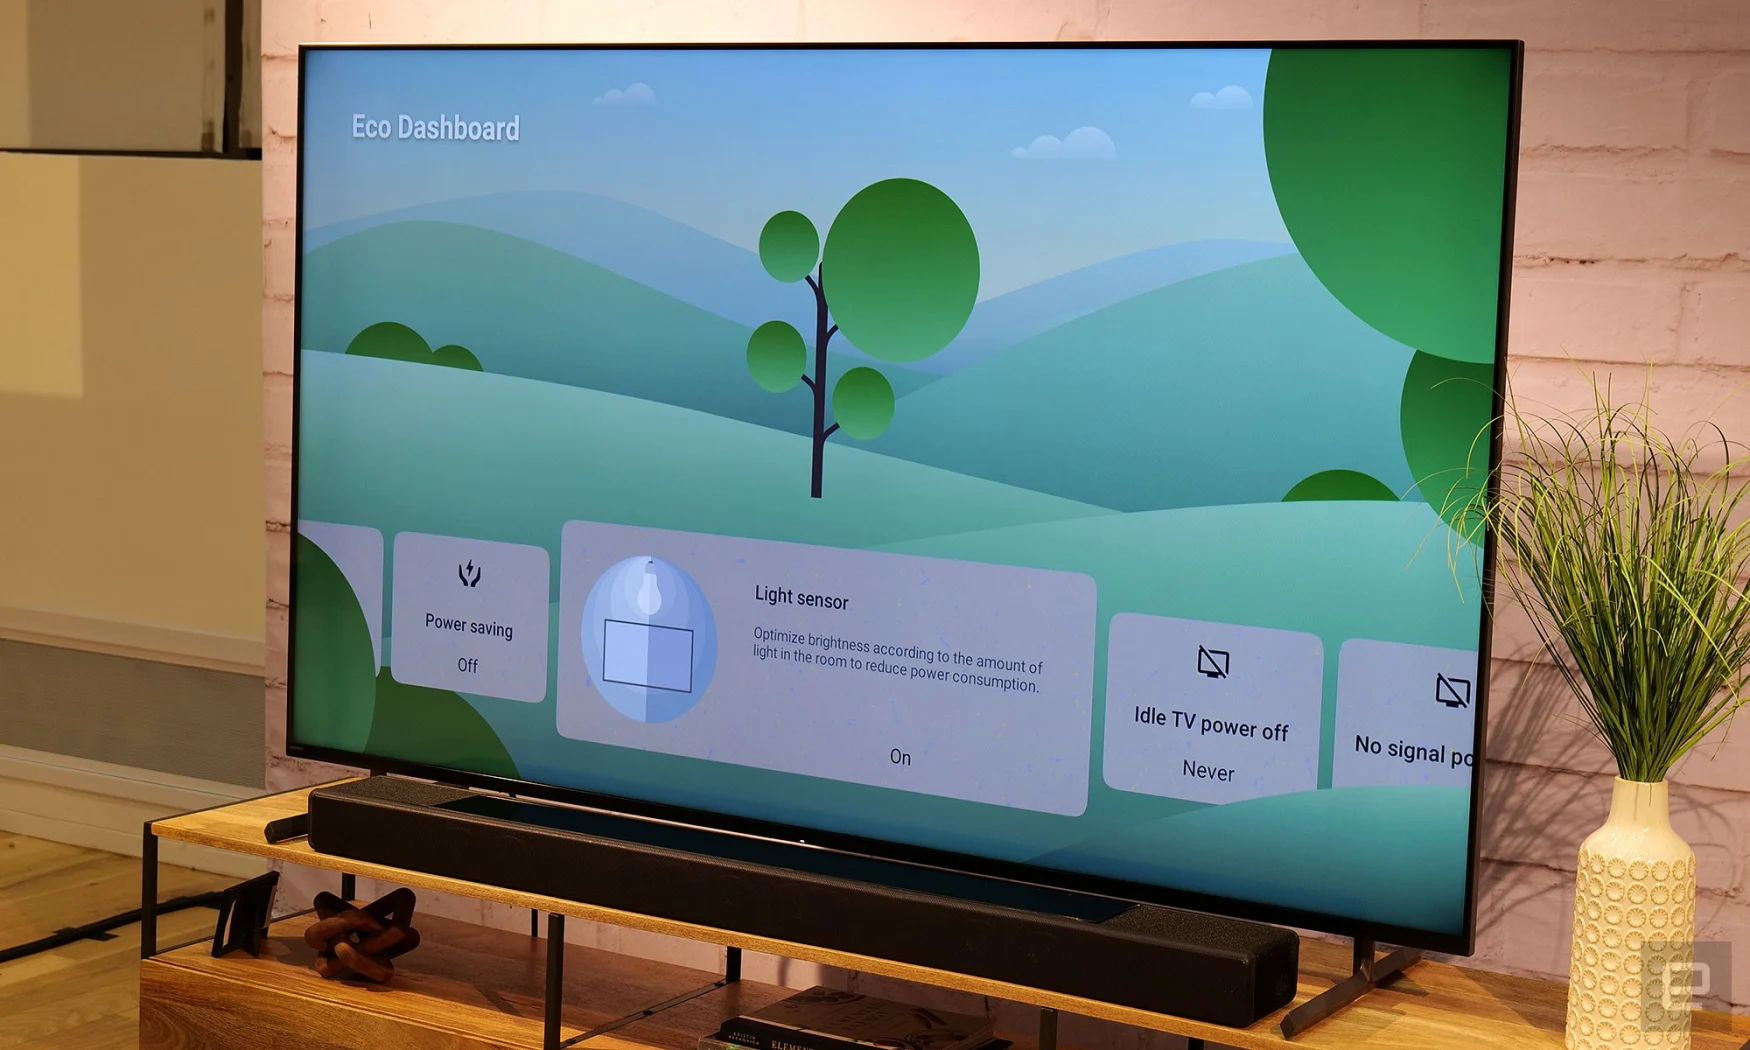 The new Eco dashboard in Sony's 2023 Bravia XR TVs makes it easy to turn on and adjust power-saving settings like brightness, idle power off times and more. 